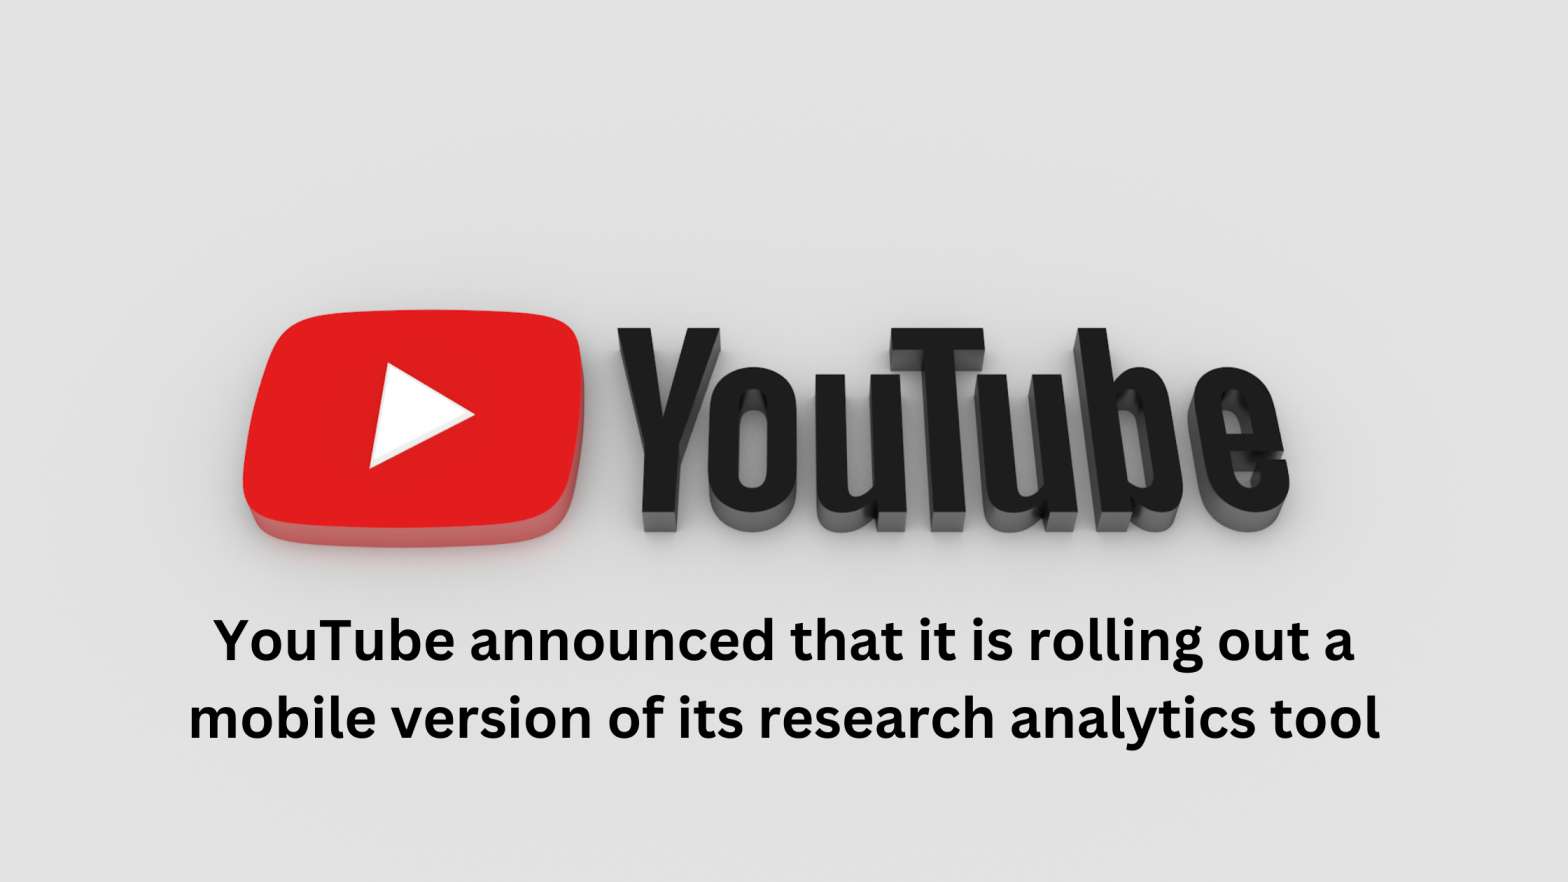 YouTube announced that it is rolling out a mobile version of its research analytics tool